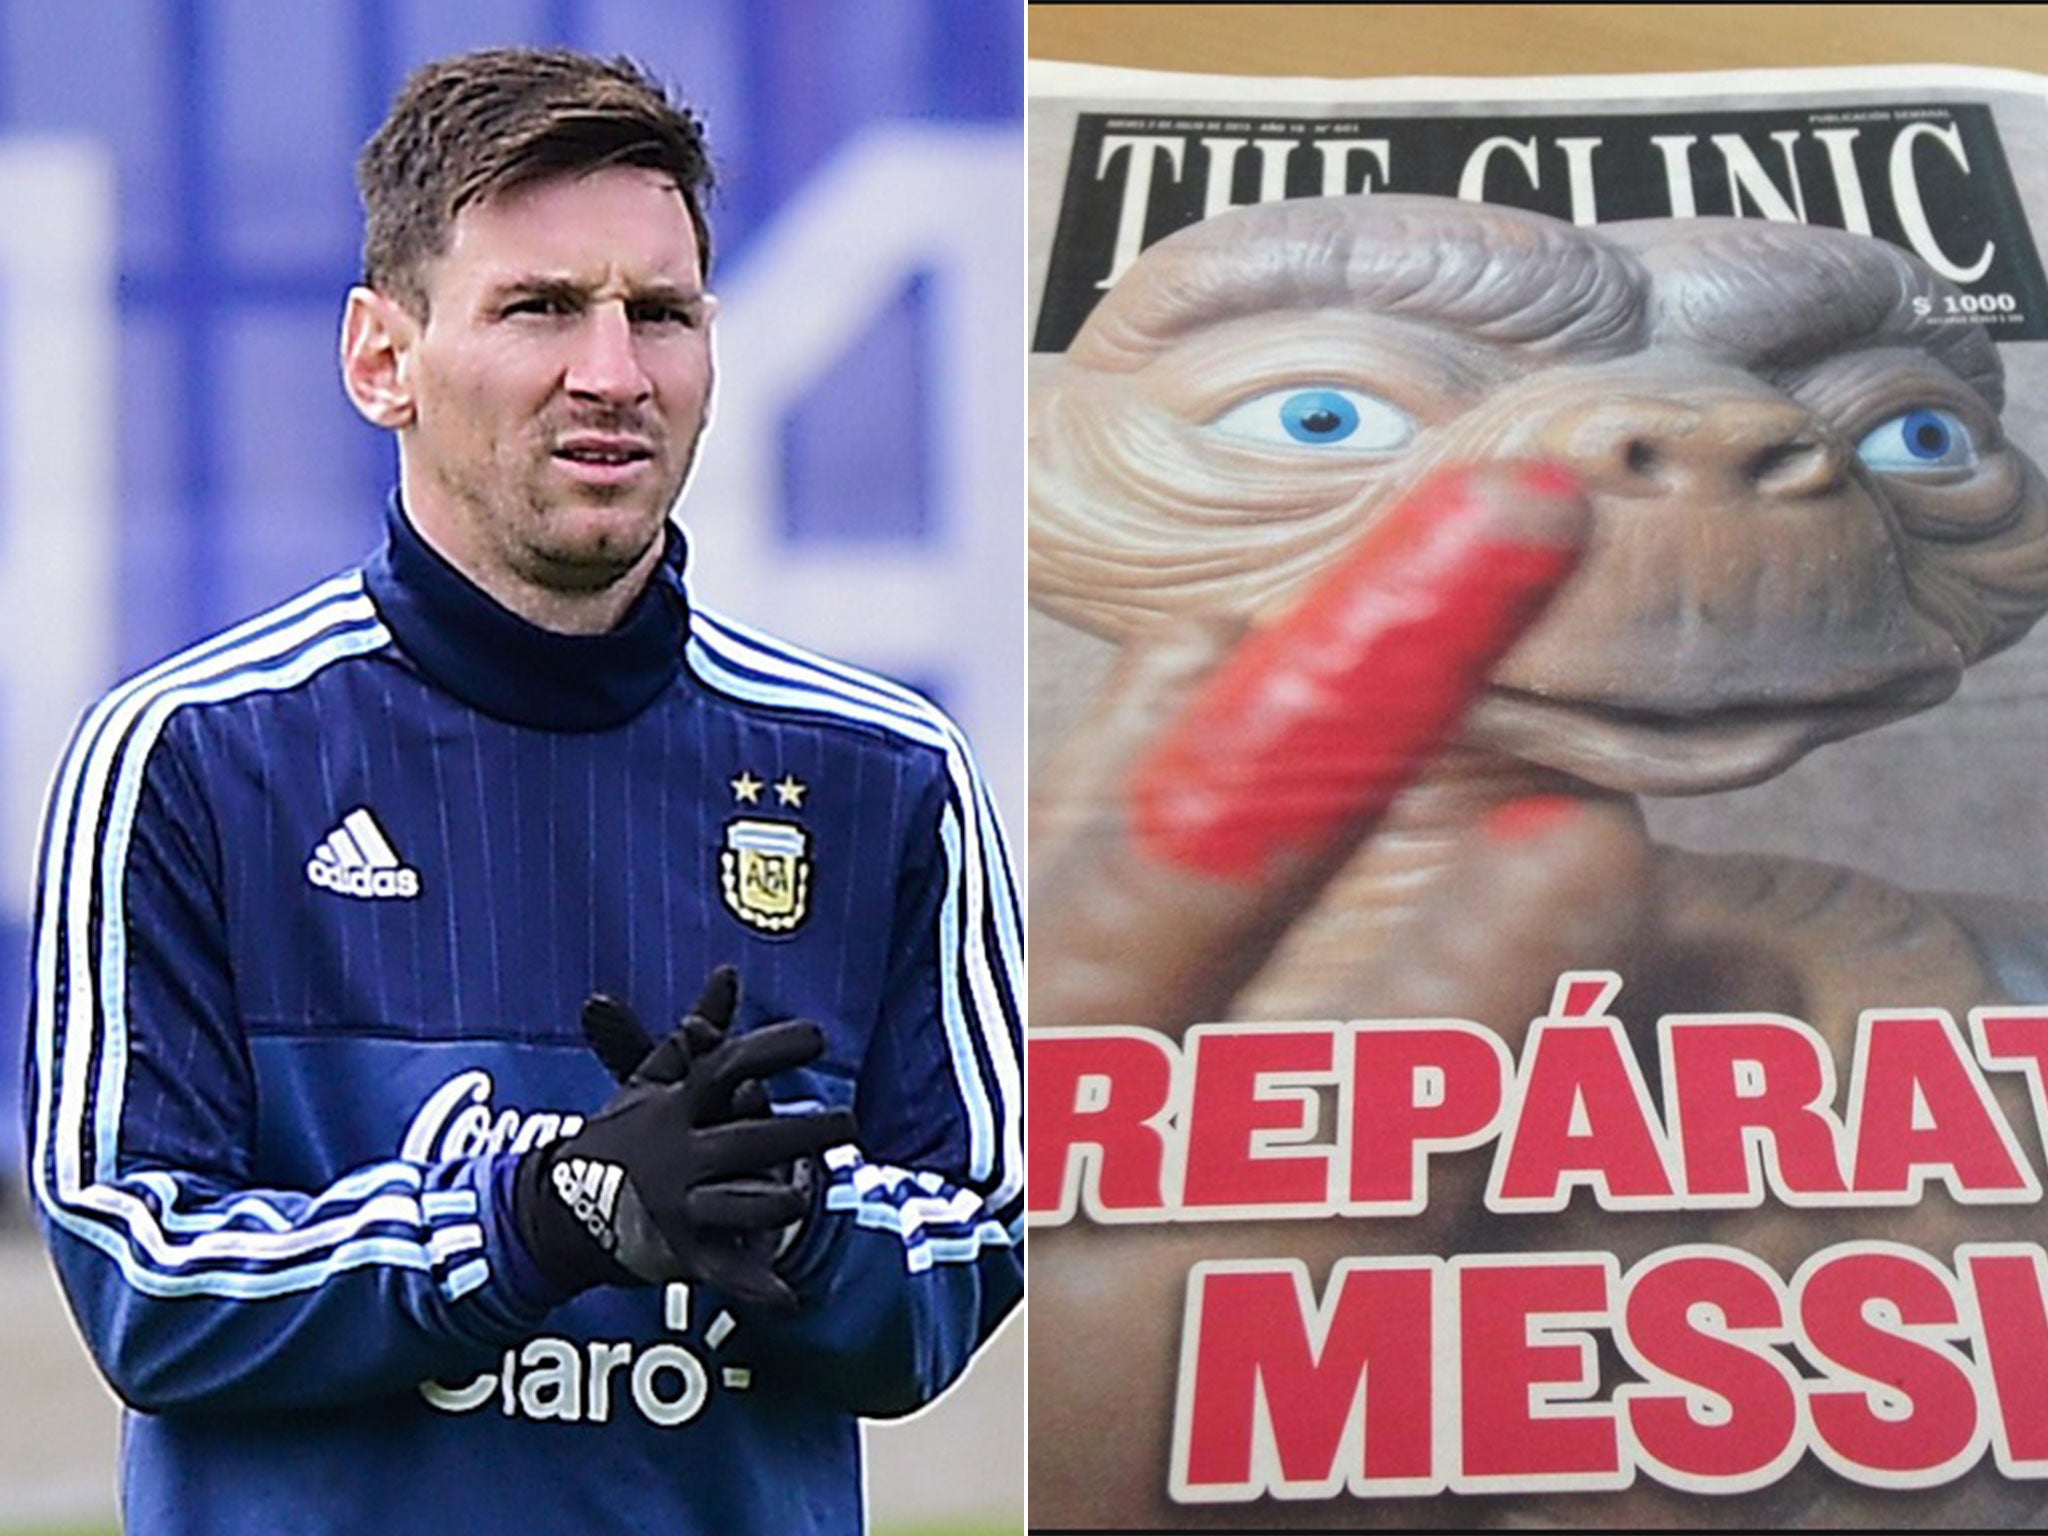 Lionel Messi and the front page